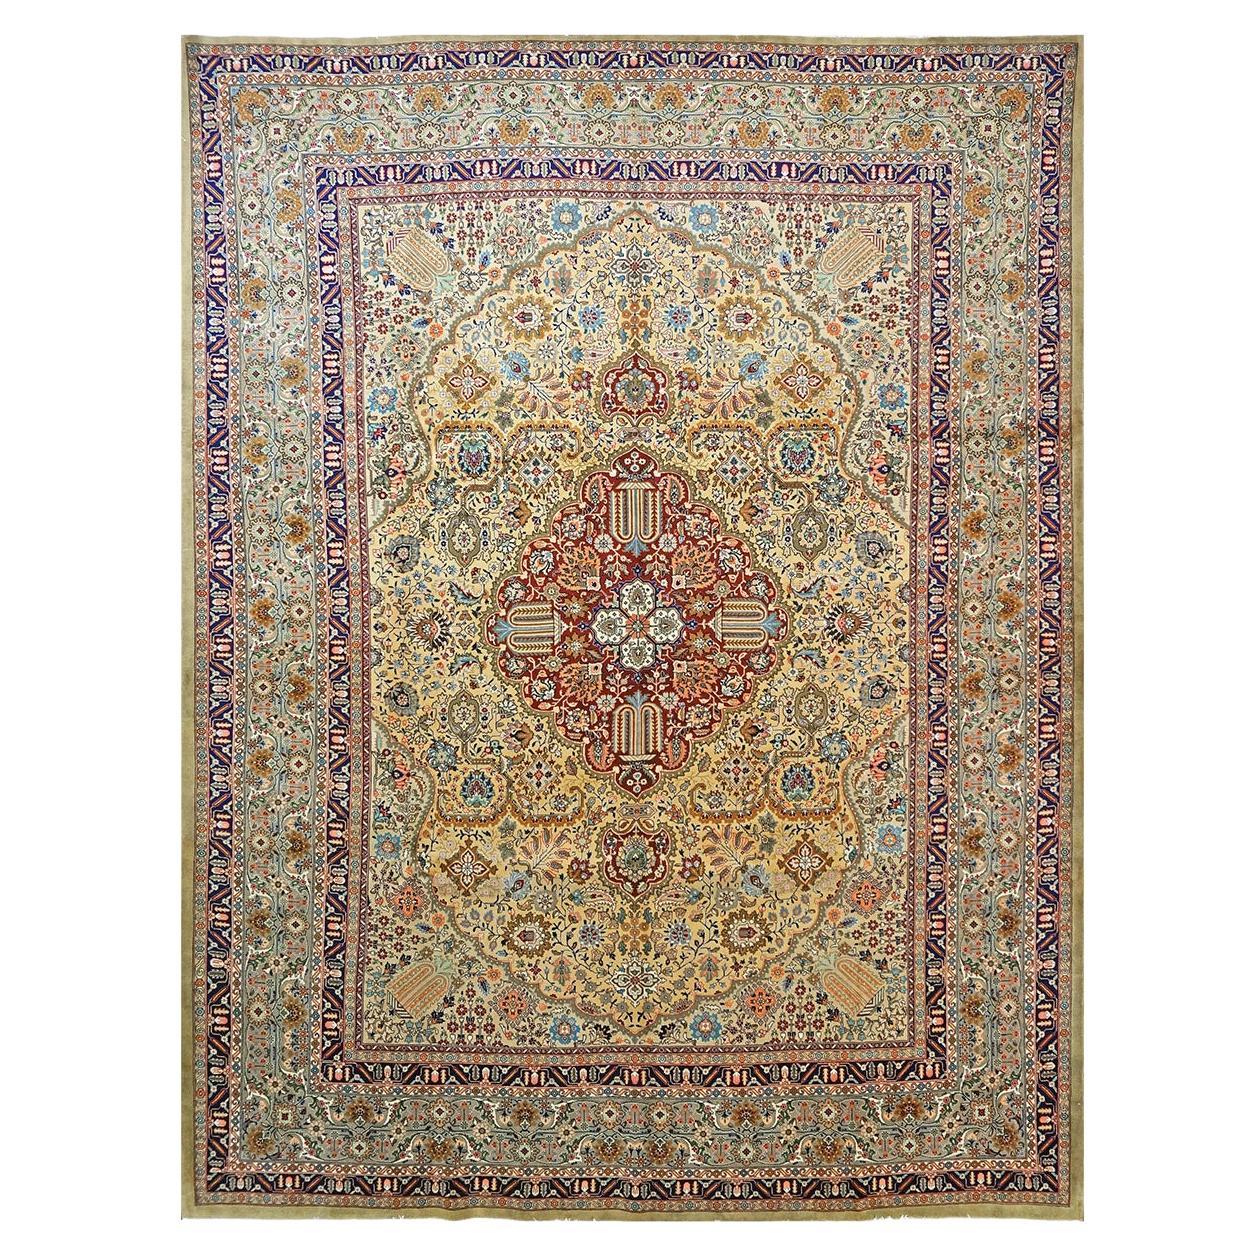 Antique Persian Tabriz 10x13 Tan, Taupe, Navy, & Gold Handmade Area Rug For Sale